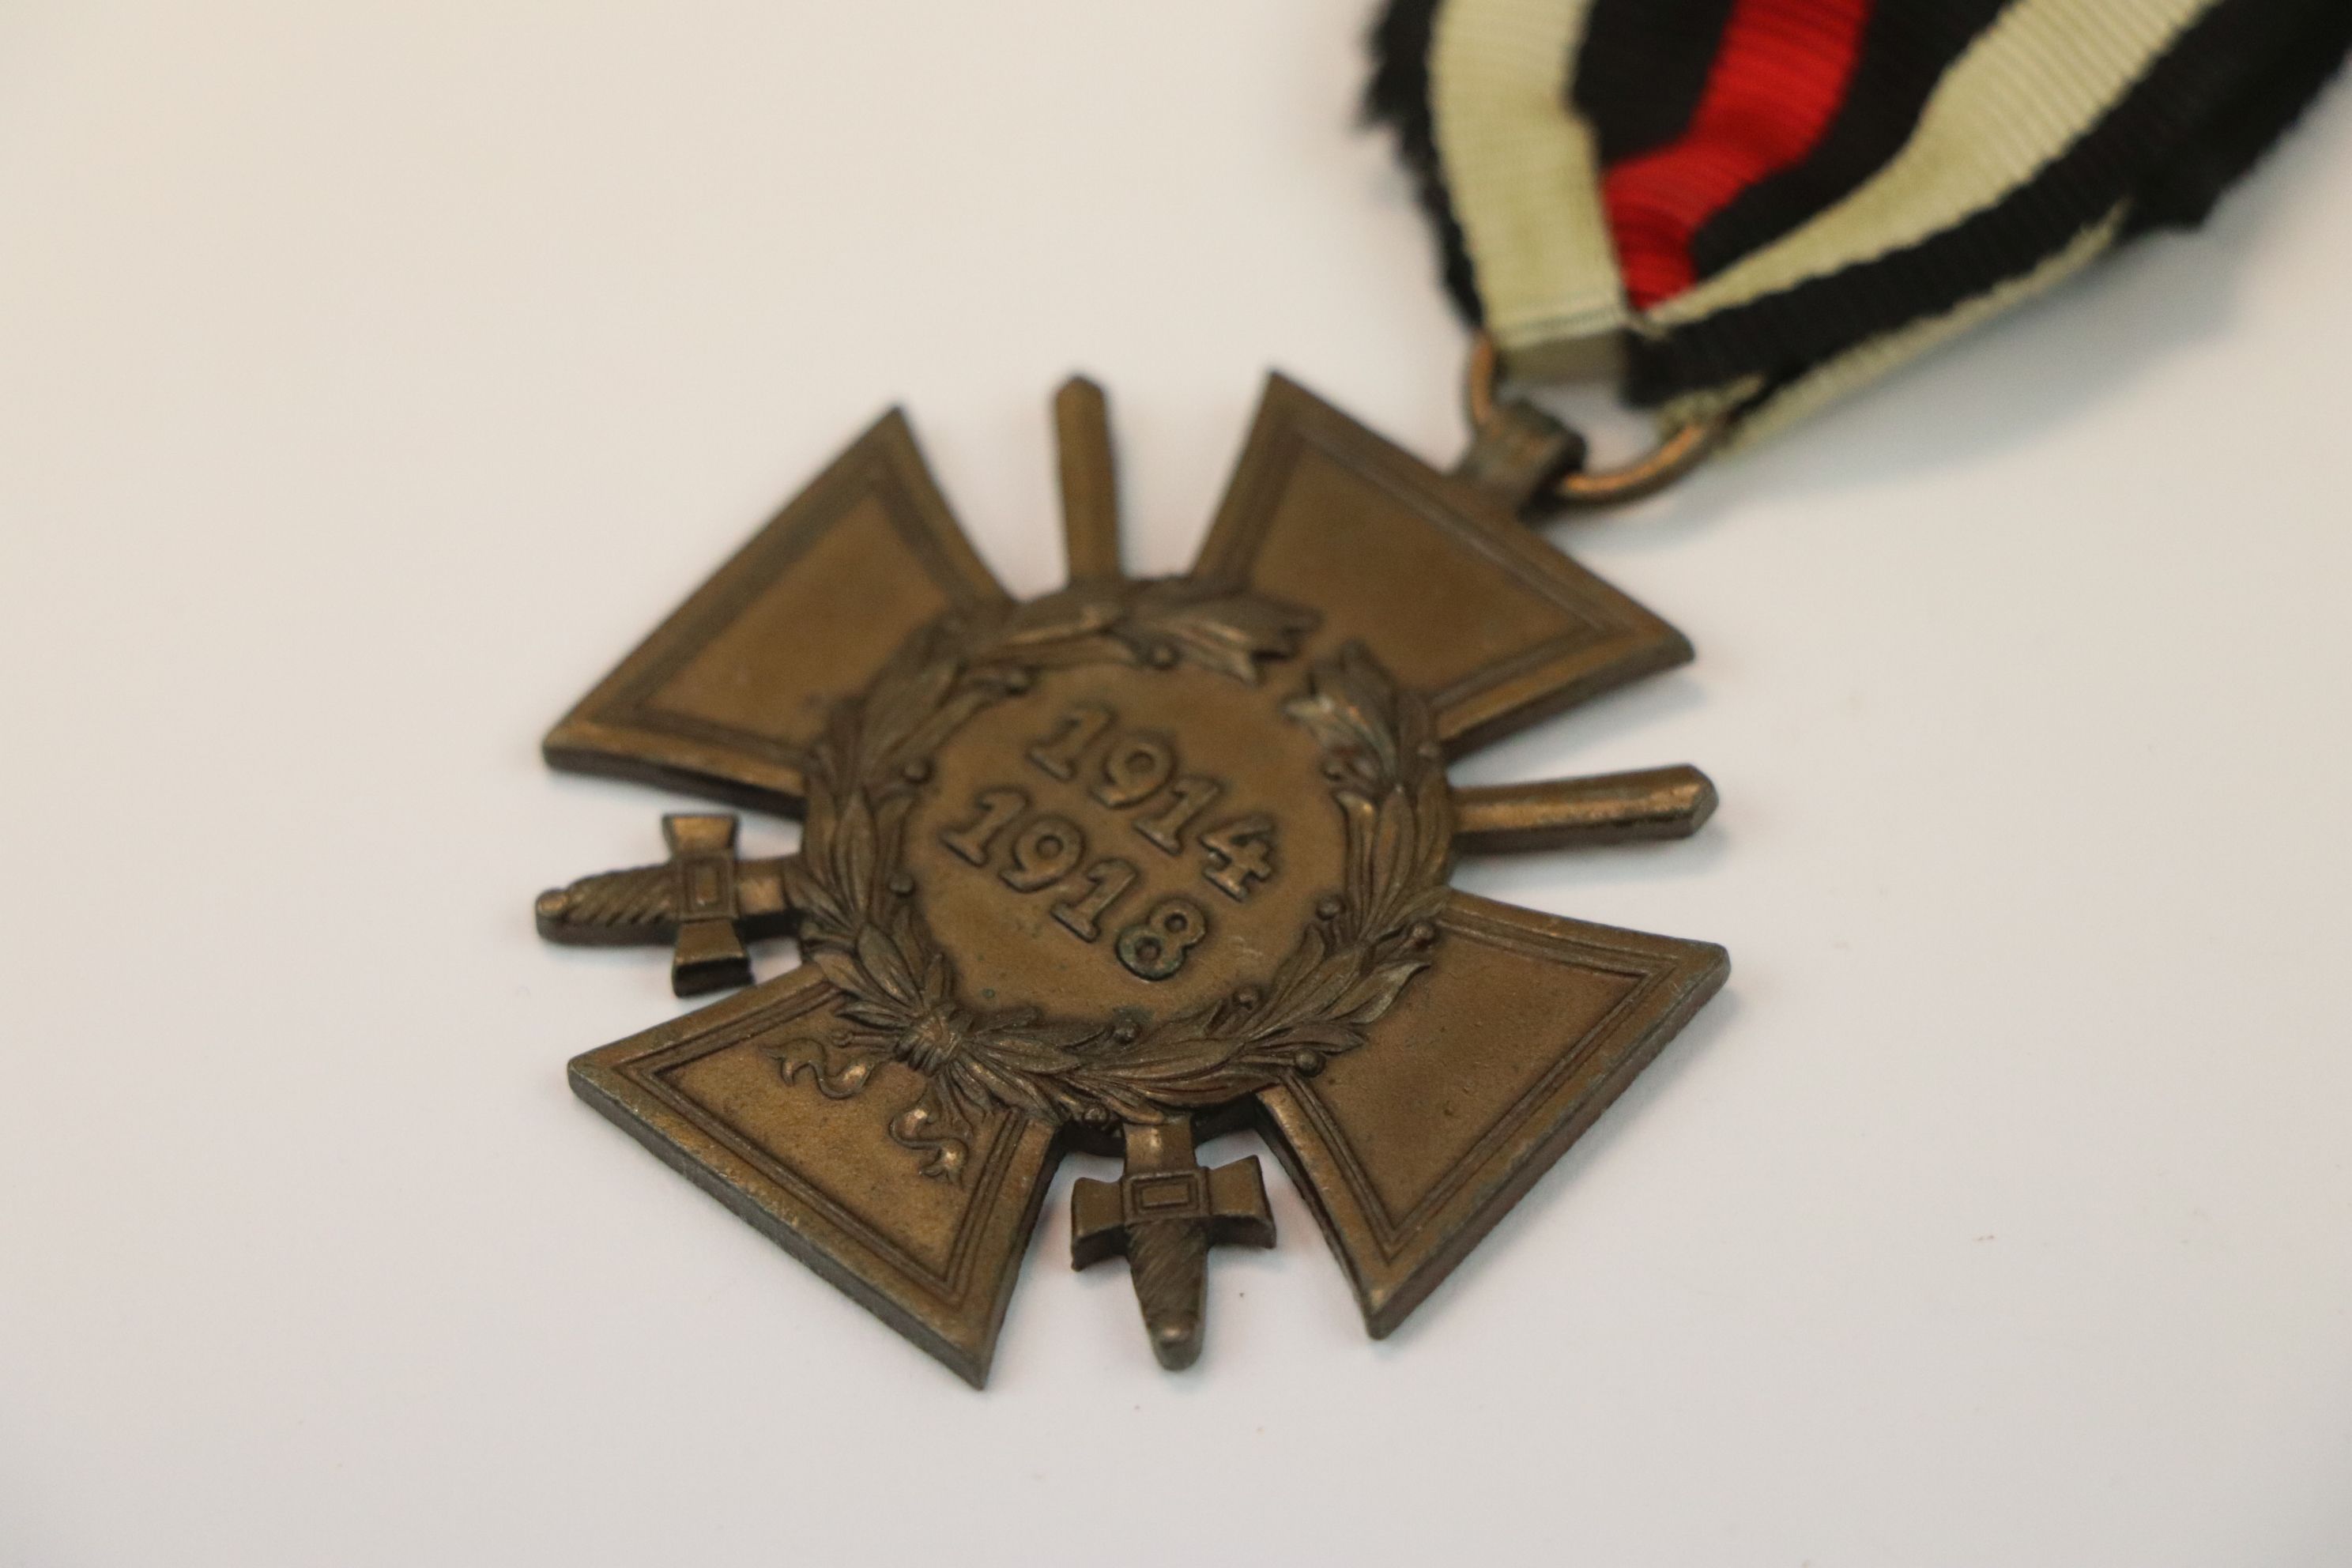 A Full Size World War One / WW1 German Honour Cross With Swords, Complete With Original Ribbon, - Image 3 of 4